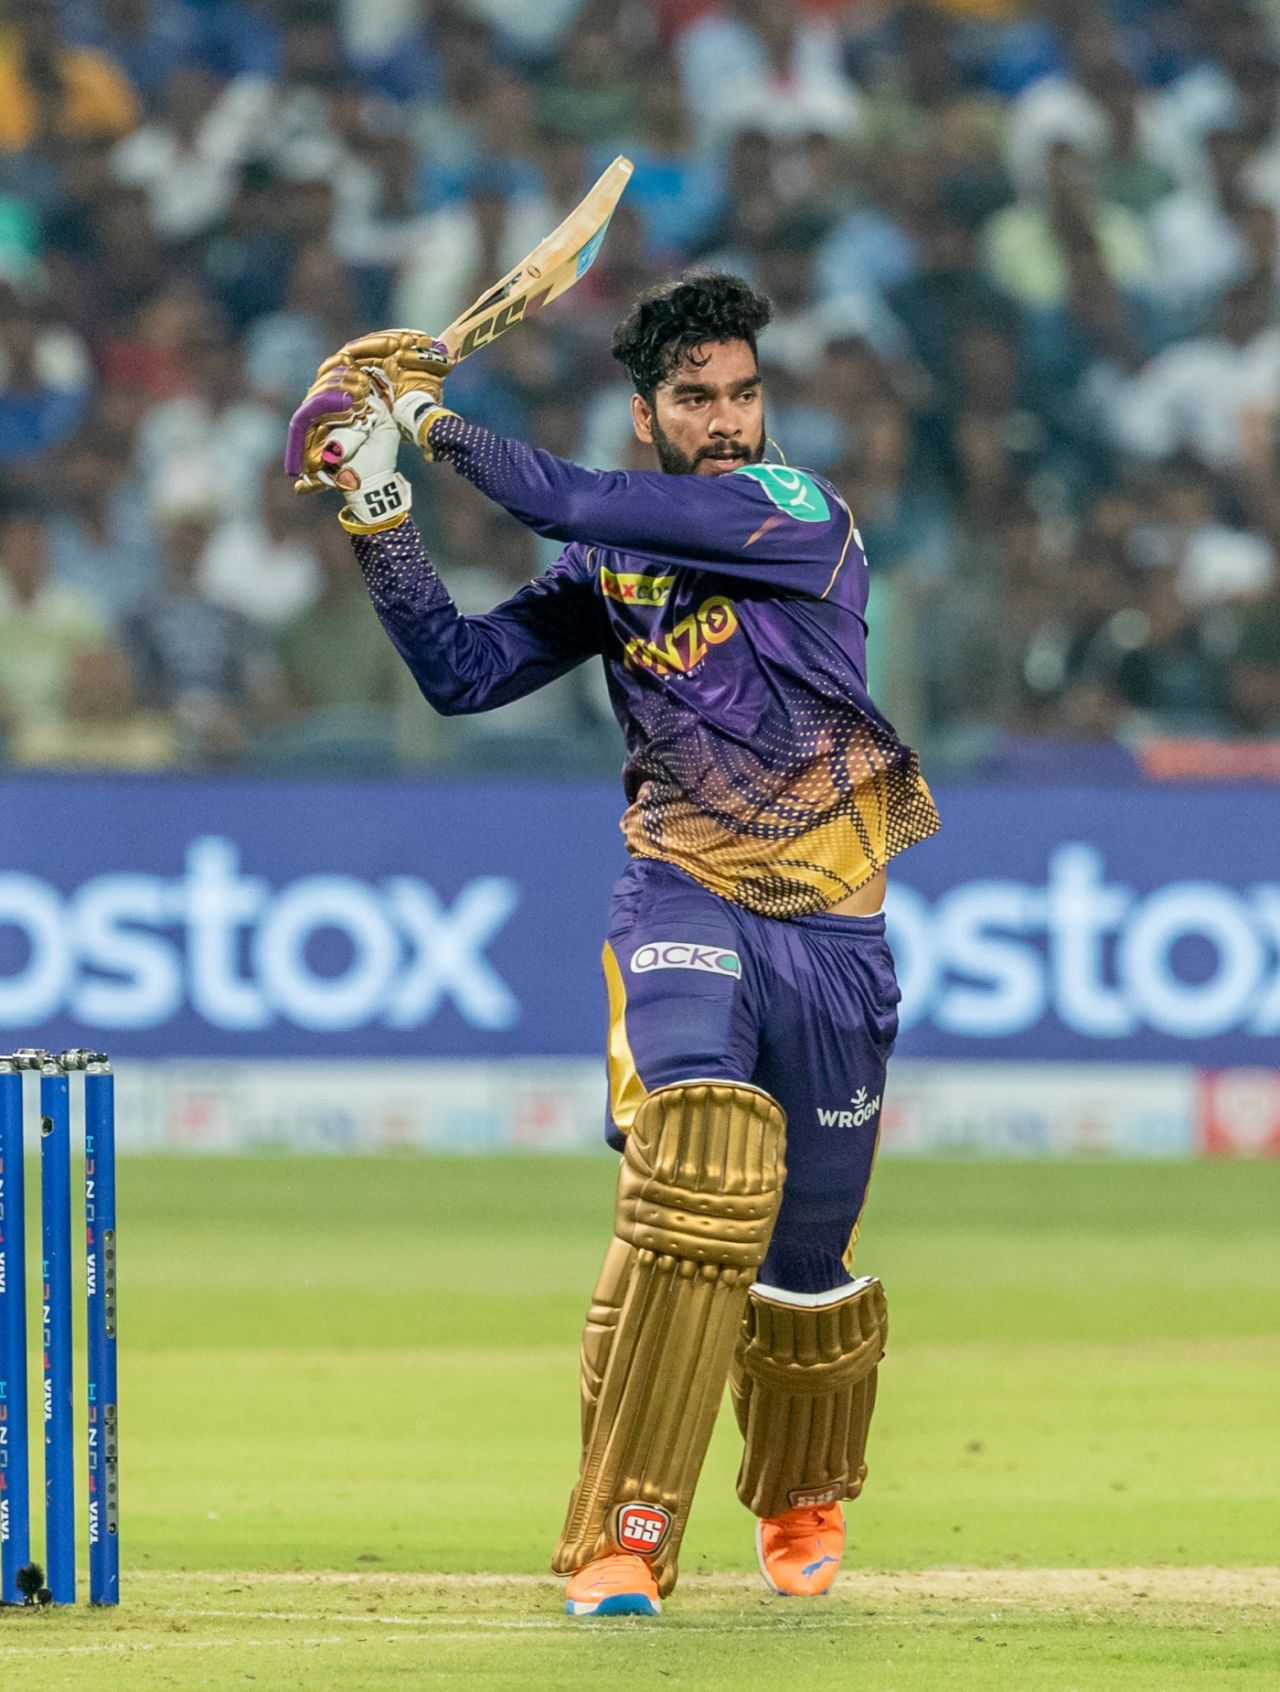 KKR Playing XI vs LSG: Venkatesh Iyer likely to COME BACK for Aaron Finch, Pat Cummins could replace Shivam Mavi - Follow Live Updates